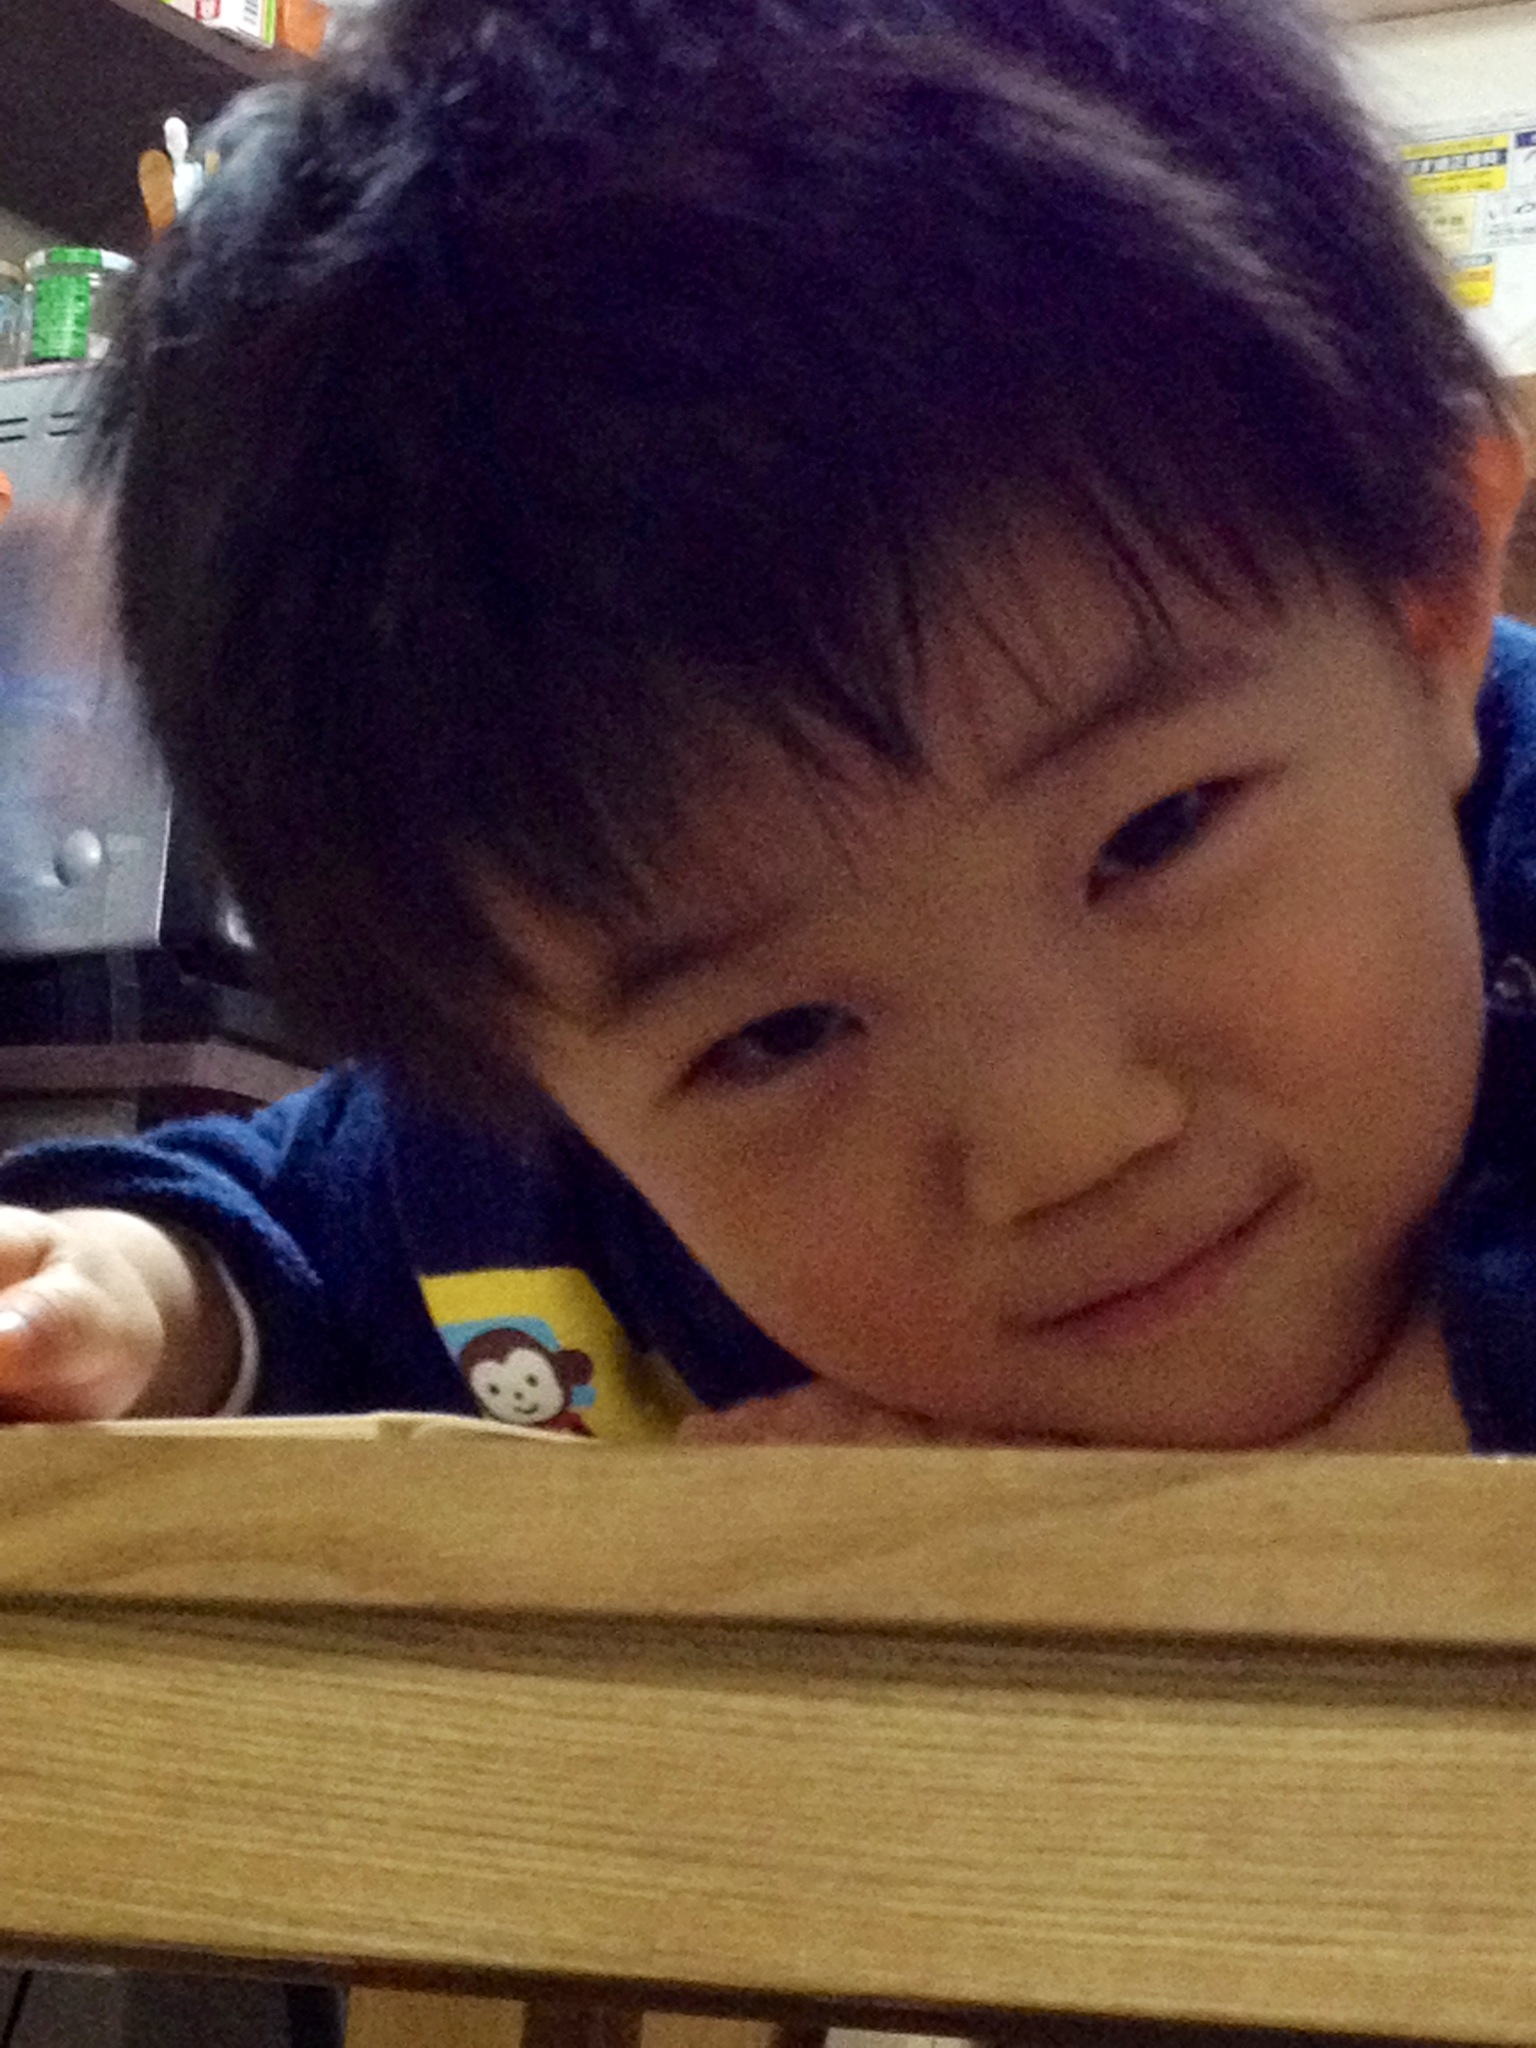 a baby boy in blue shirt leaning over table